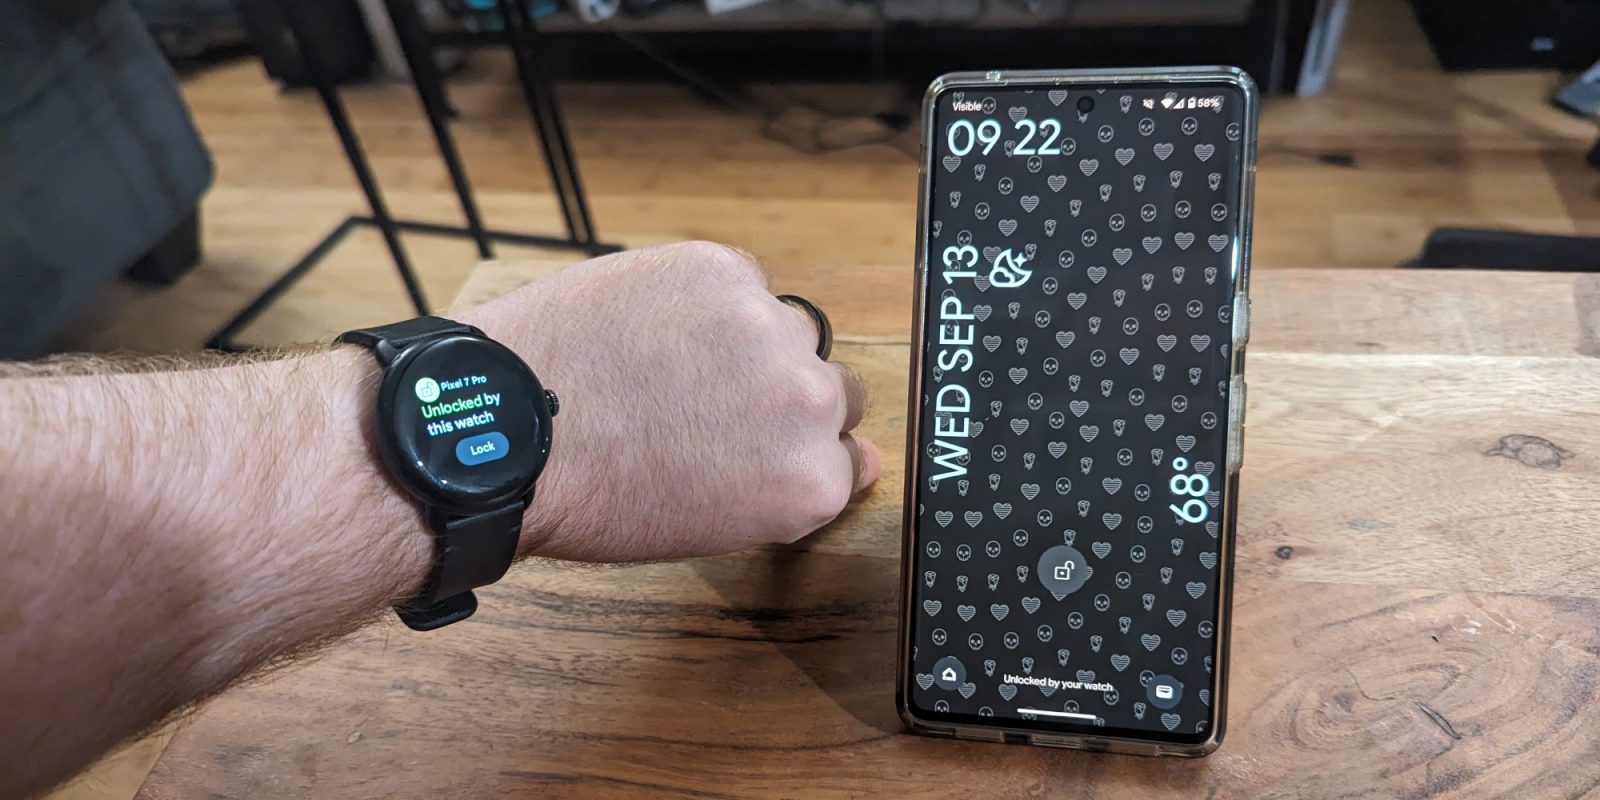 How to set up a Wear OS smartwatch with your Android phone